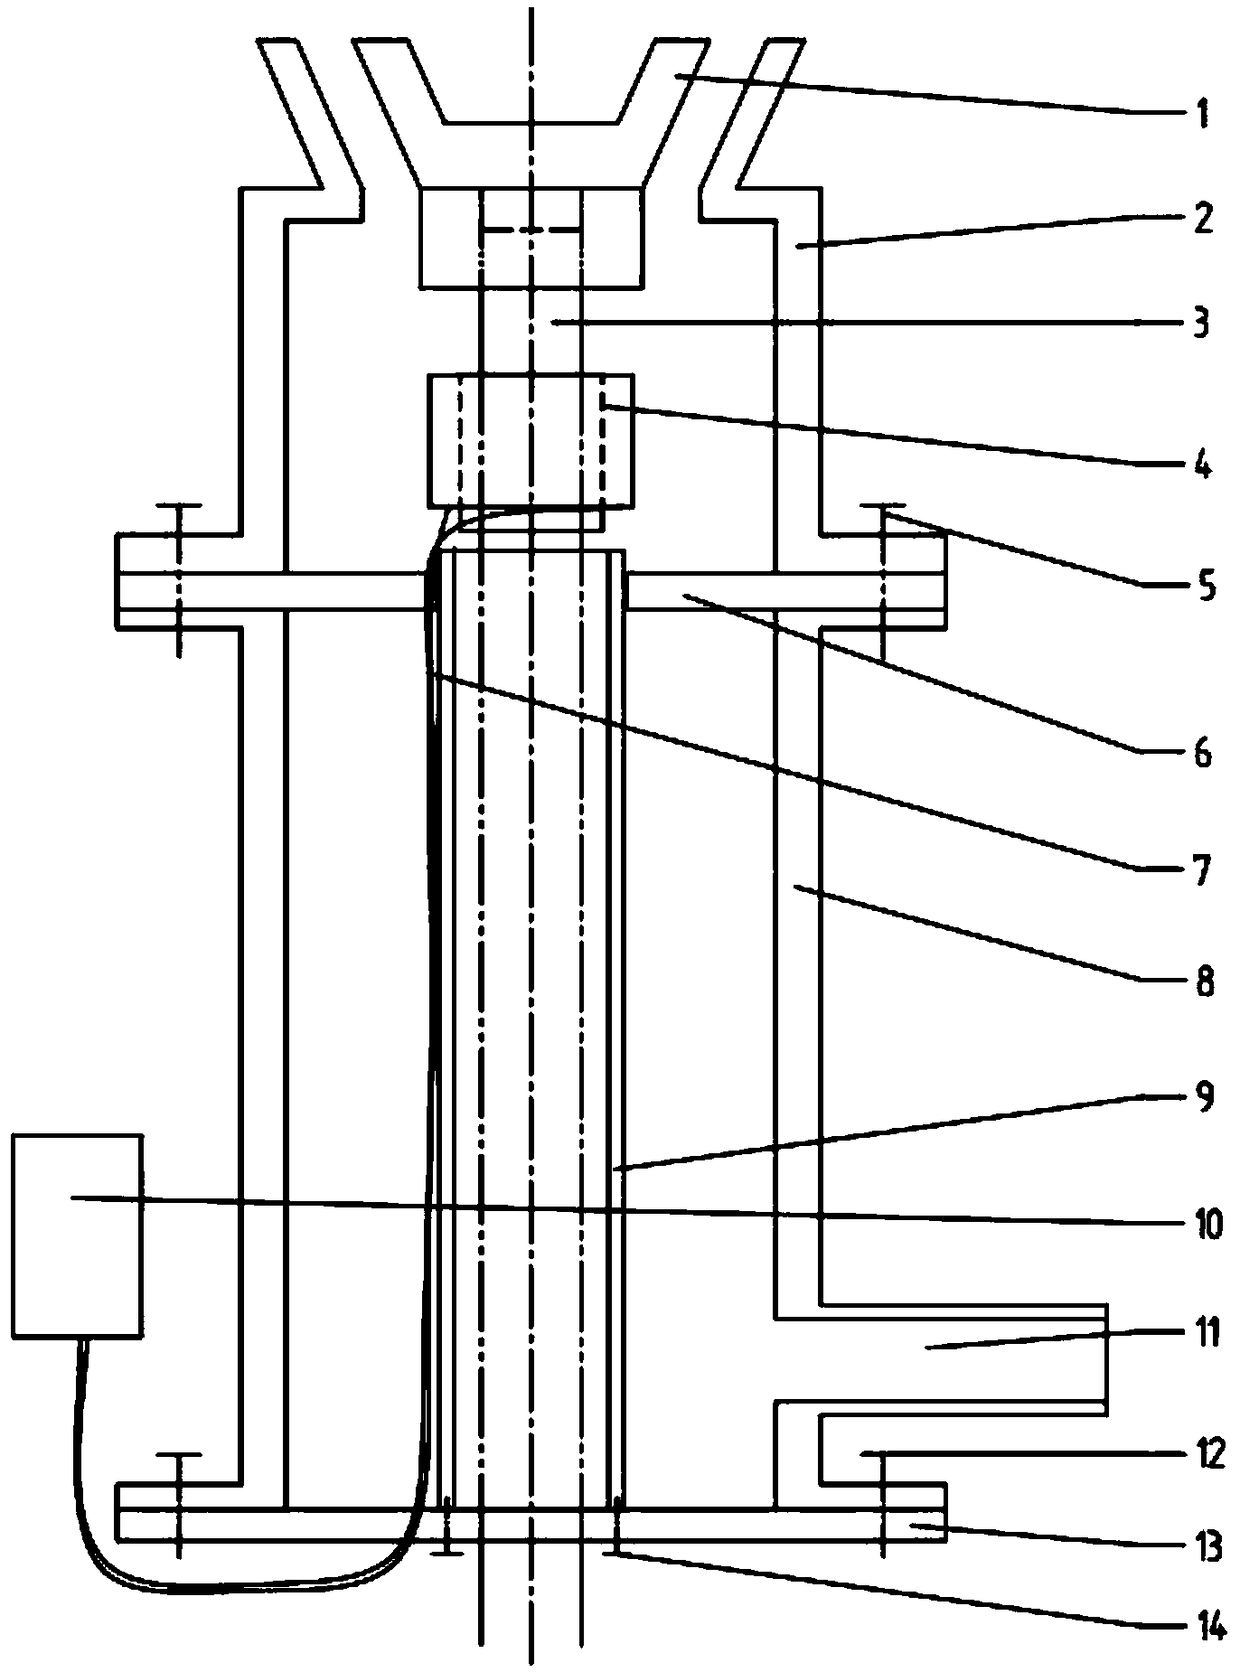 Granulation system with thermal protection function